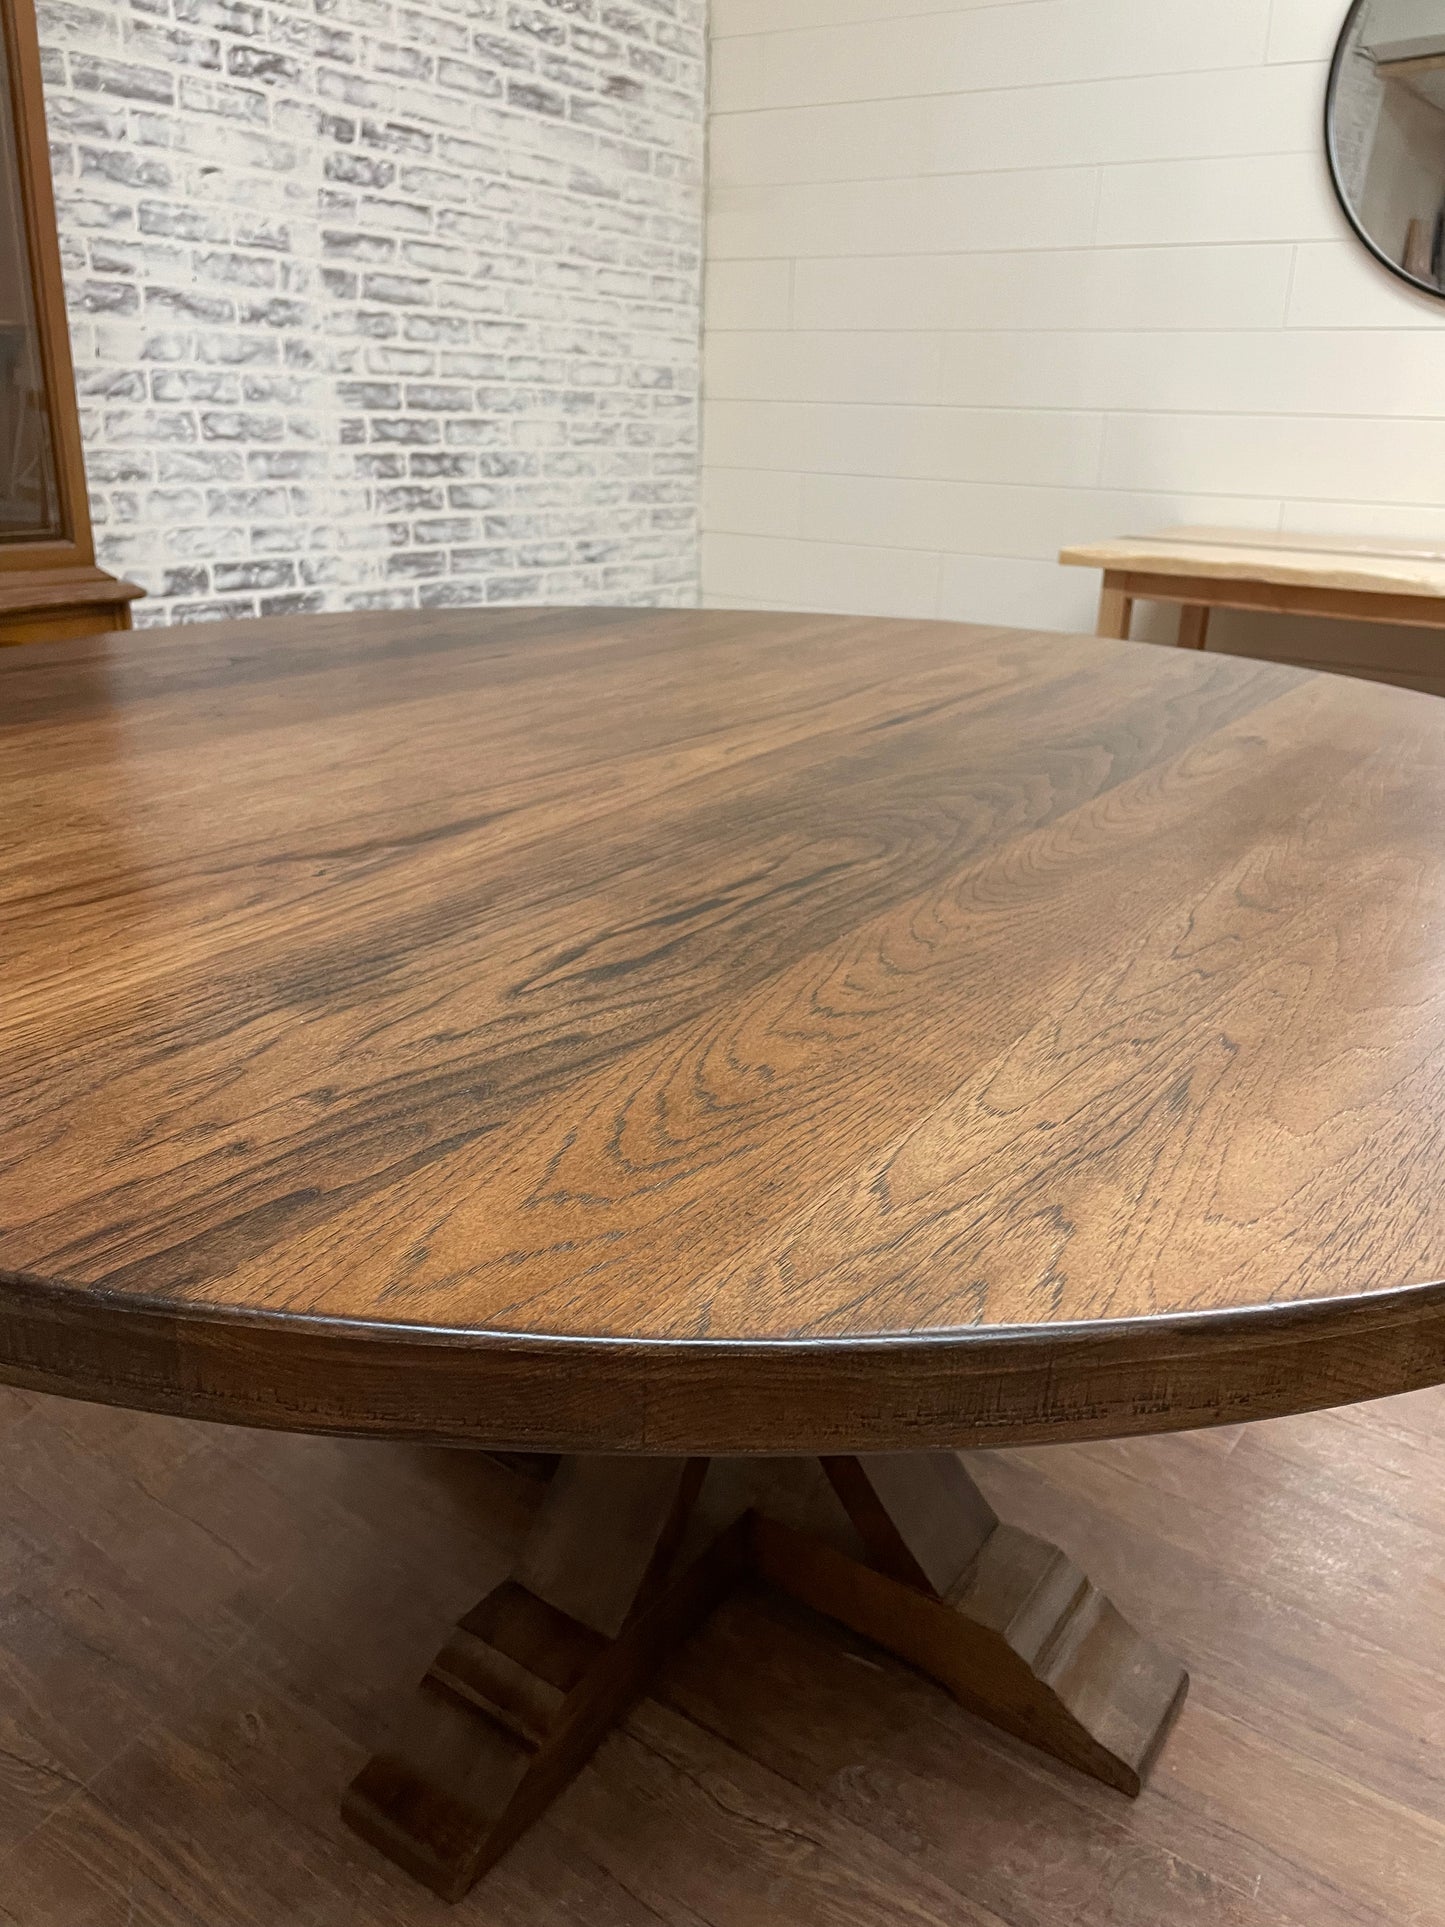 Pictured is a 60" W Hickory table with Espresso stain.